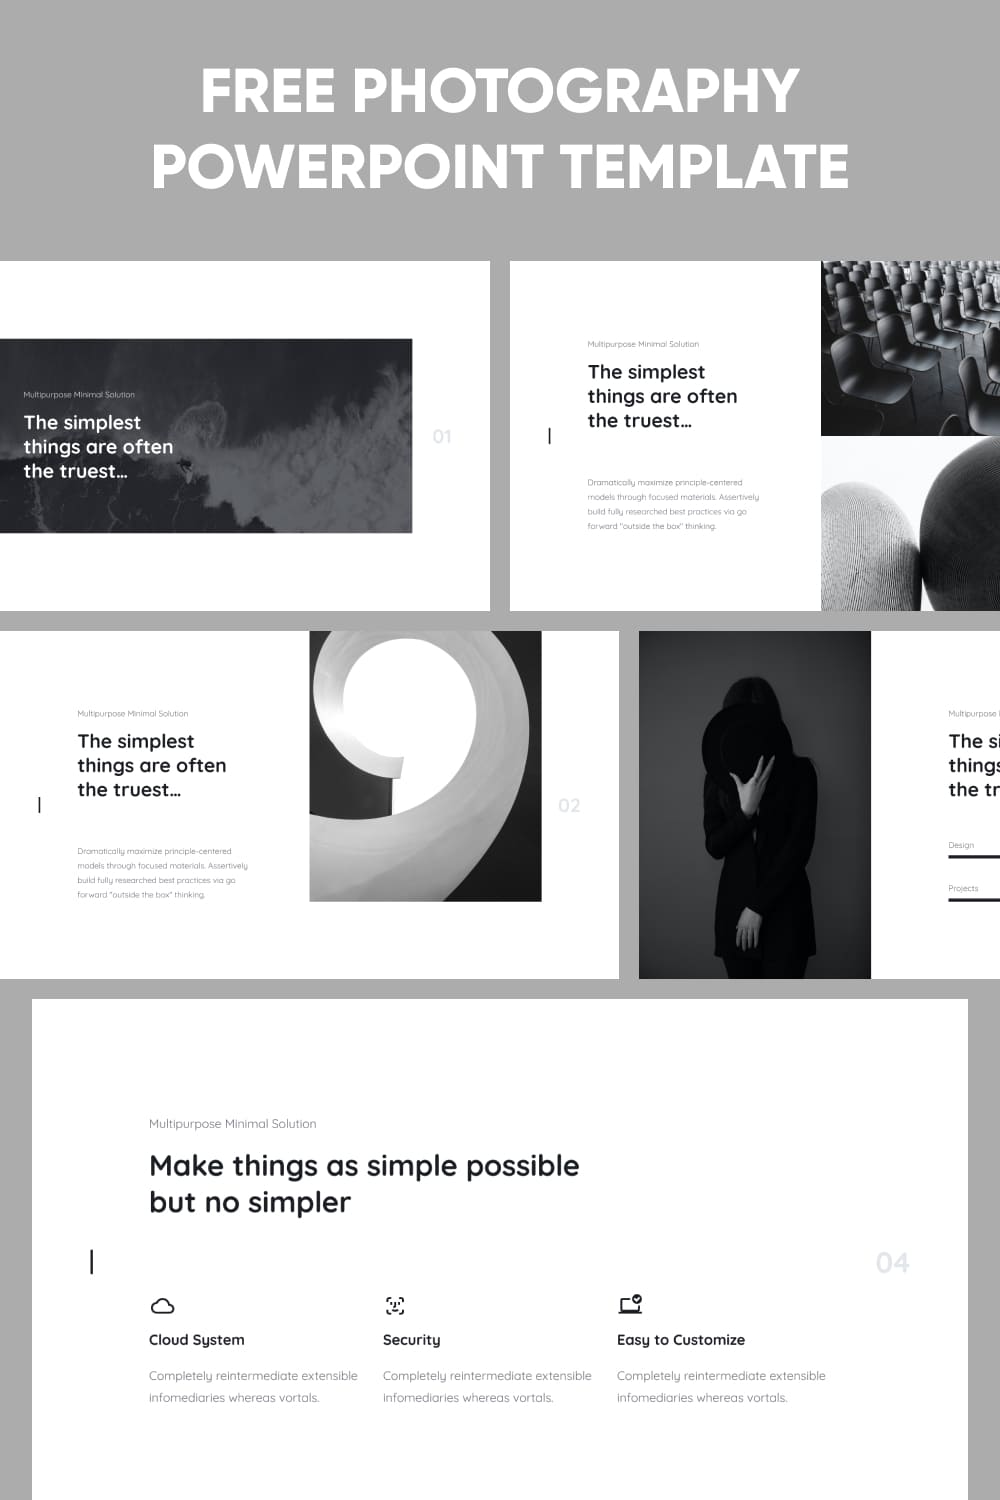 Free Photography Powerpoint Template Pinterest.